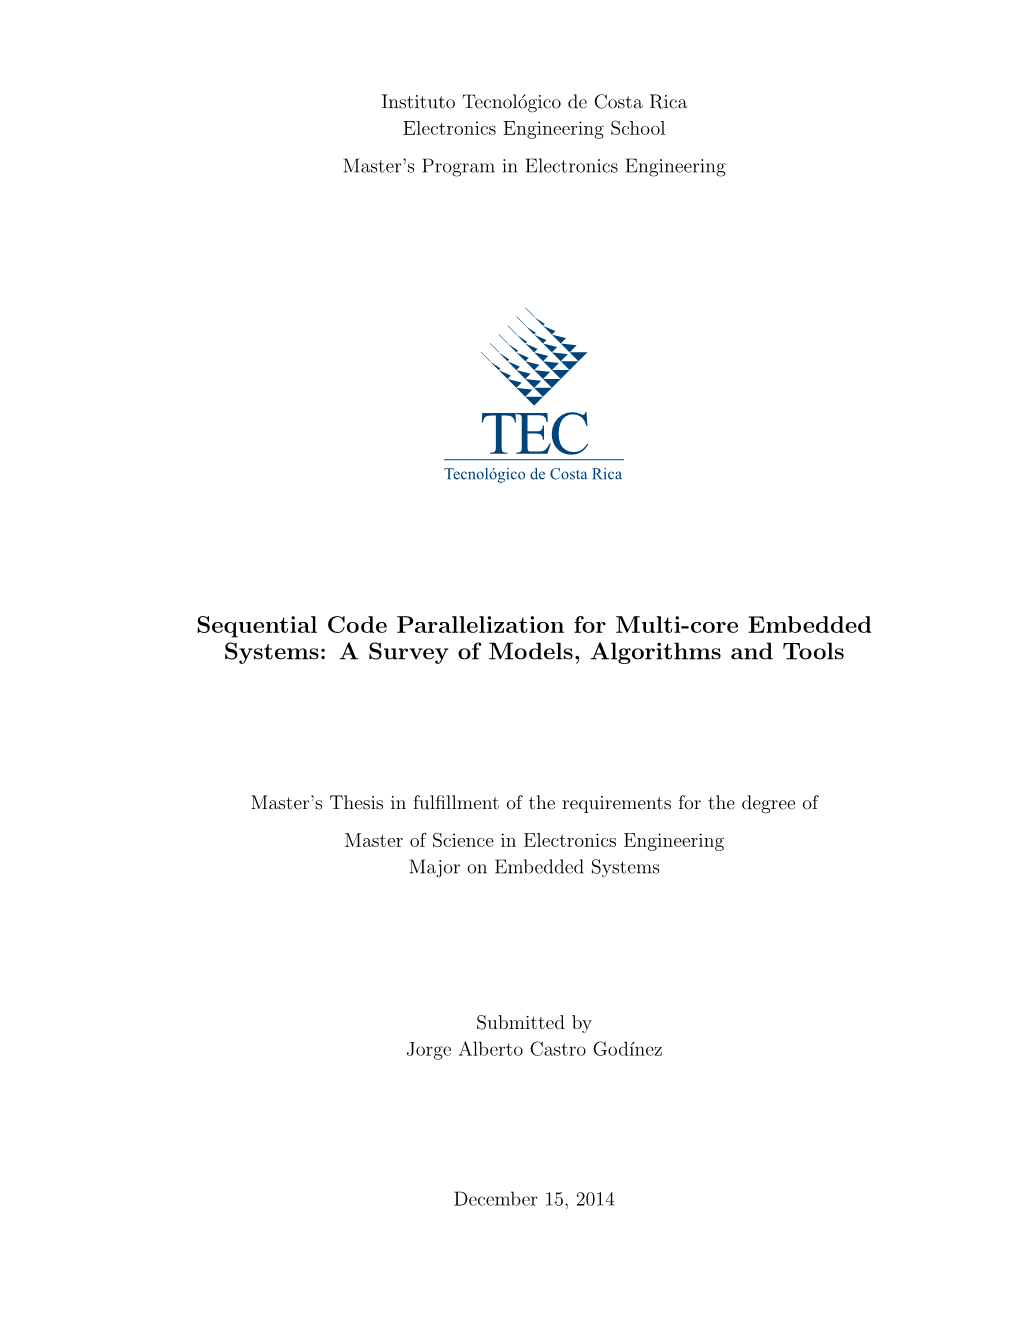 Sequential Code Parallelization for Multi-Core Embedded Systems: a Survey of Models, Algorithms and Tools